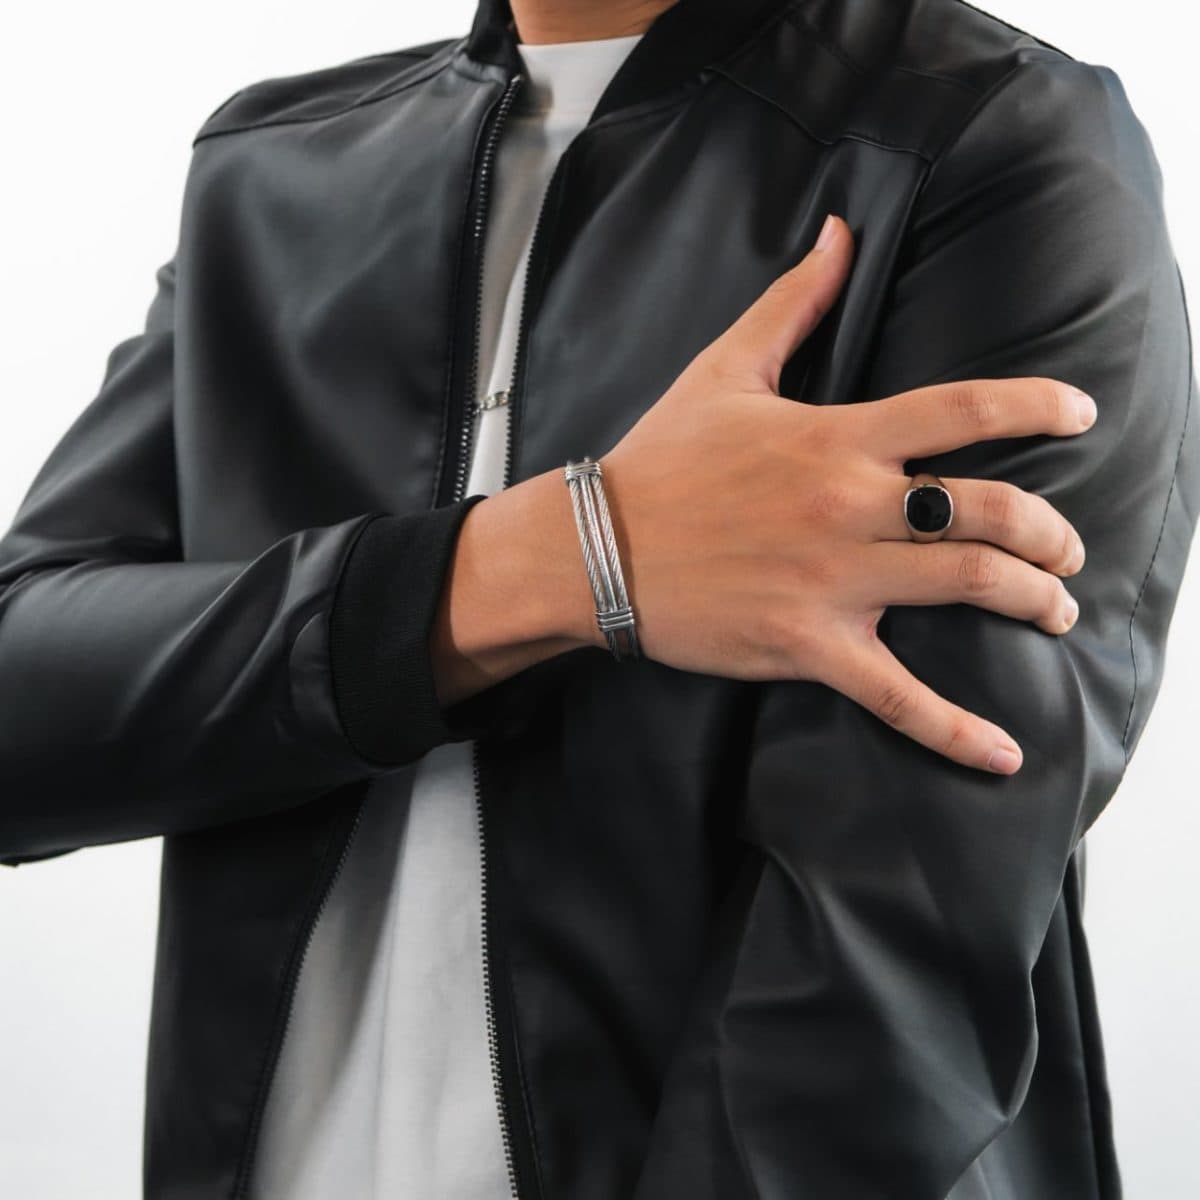 https://m.clubbella.co/product/urban-steel-cable-cuff-bracelet-silver/ Urban Steel Cable Cuff Bracelet - Silver1 (3)